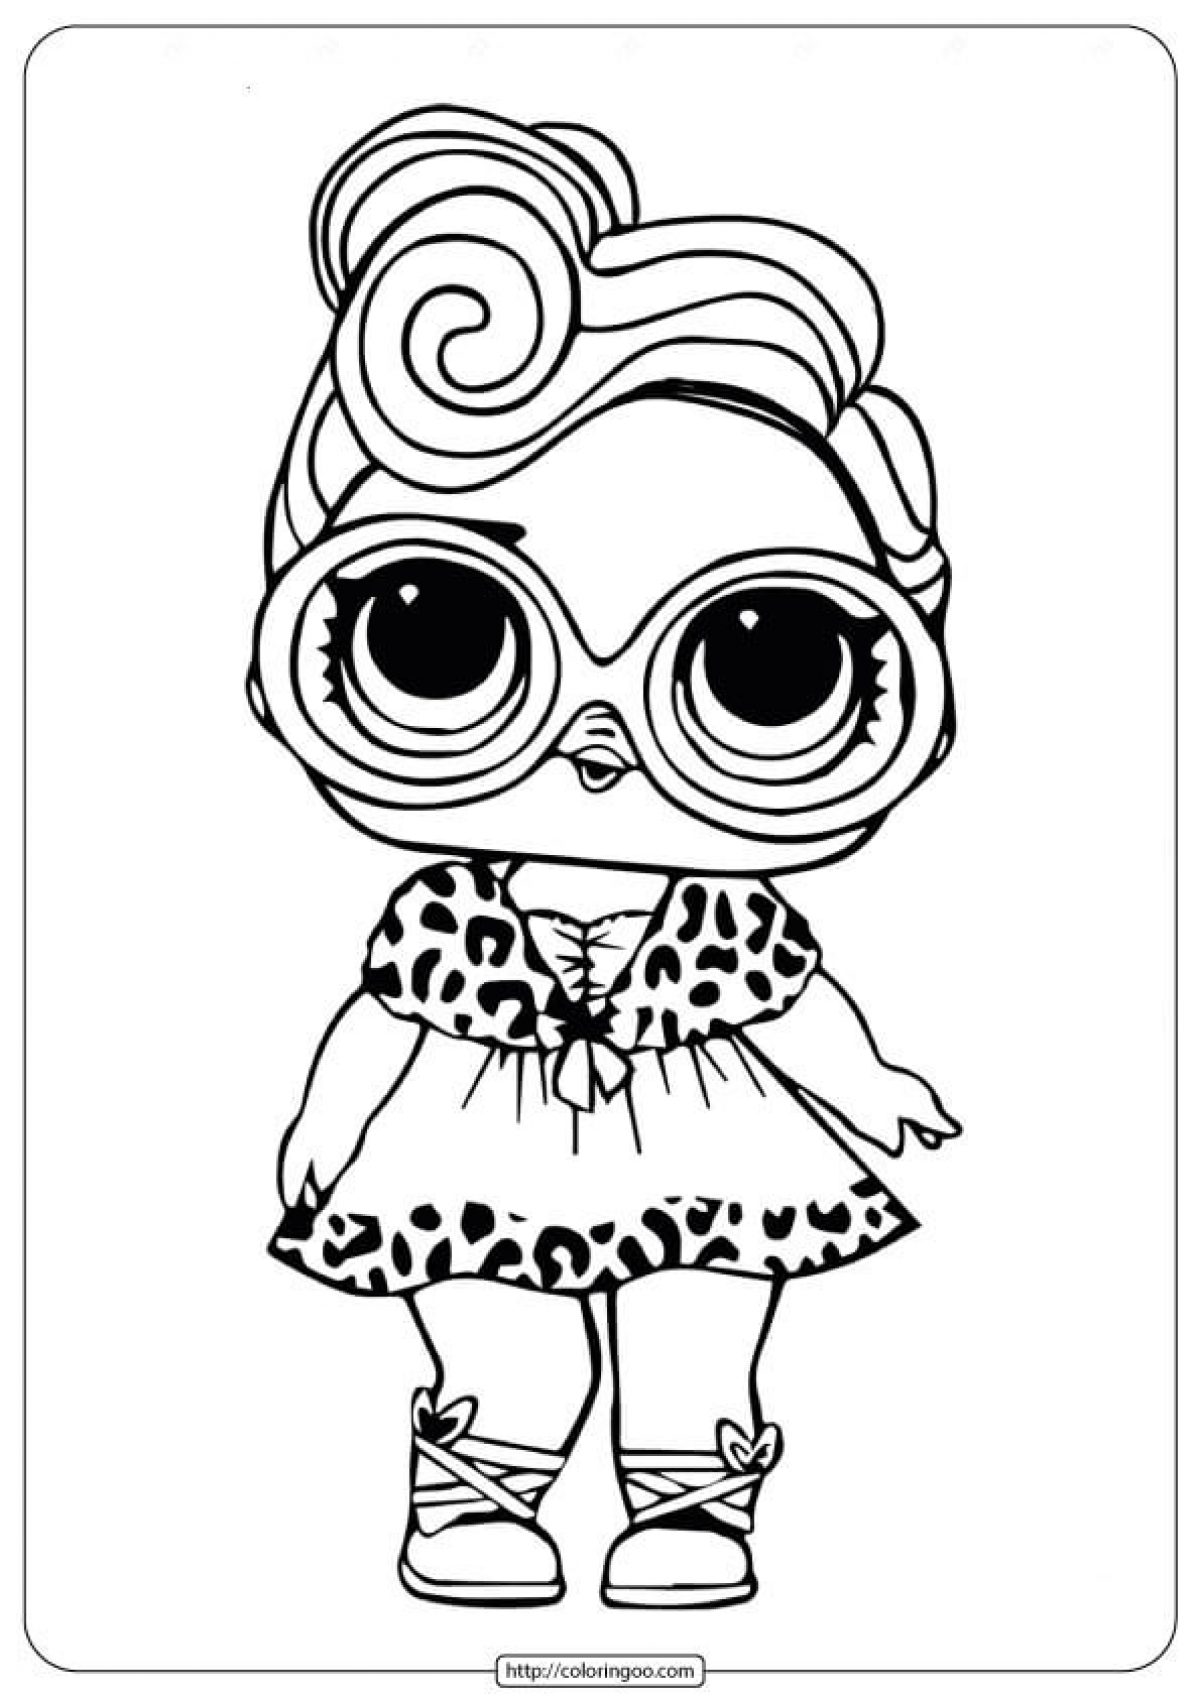 Free Printable Lol Surprise Dollface Coloring Pages - Coloring Library